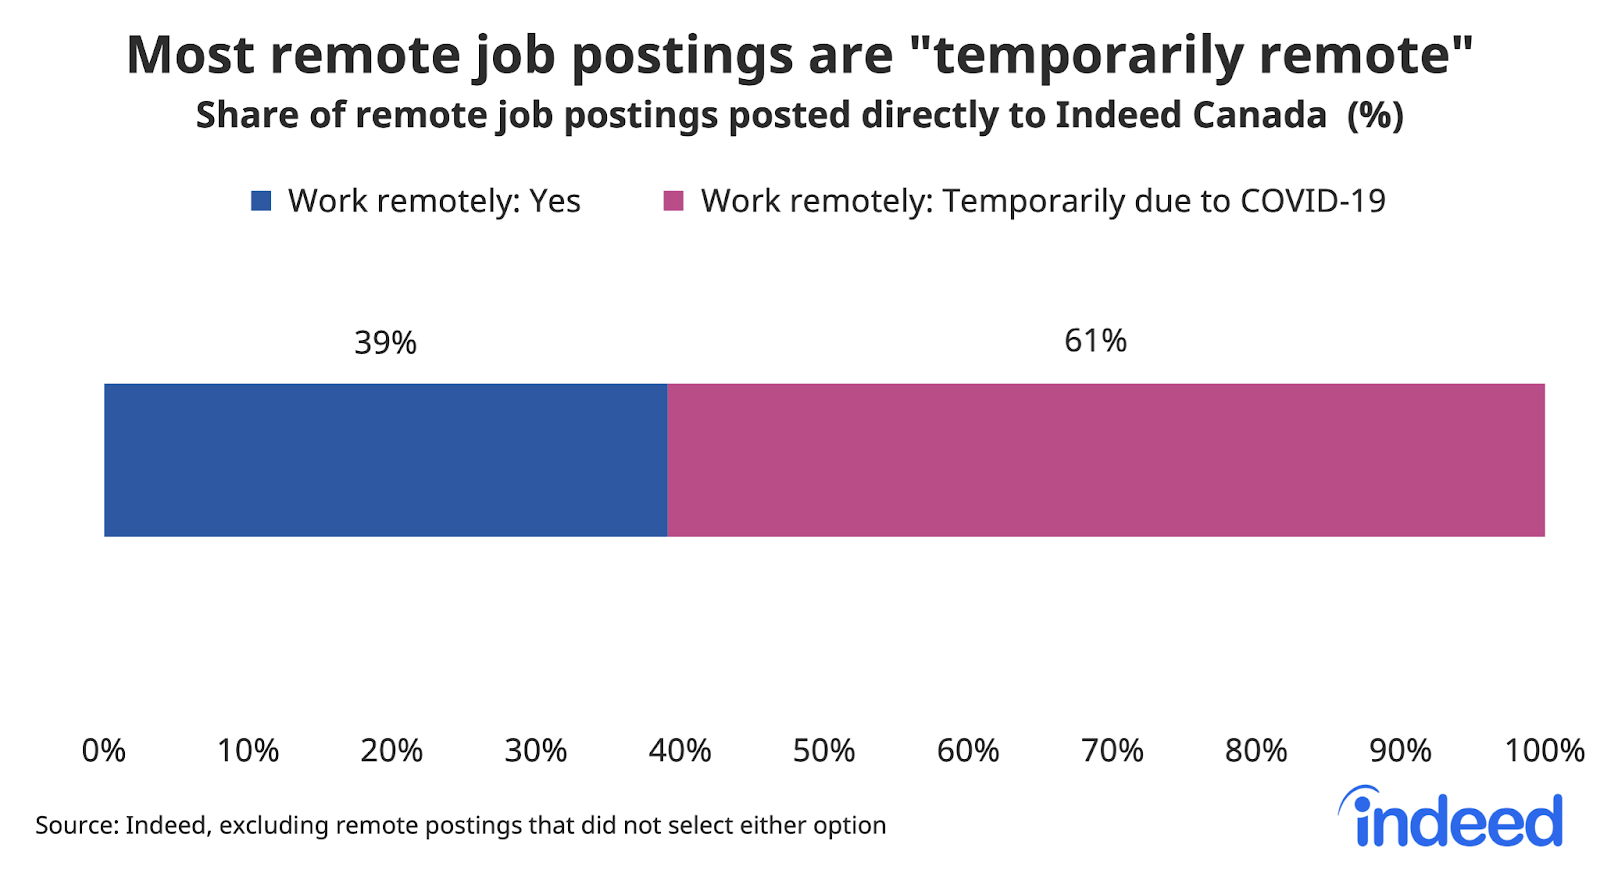 Bar graph showing most remote job postings are temporarily remote